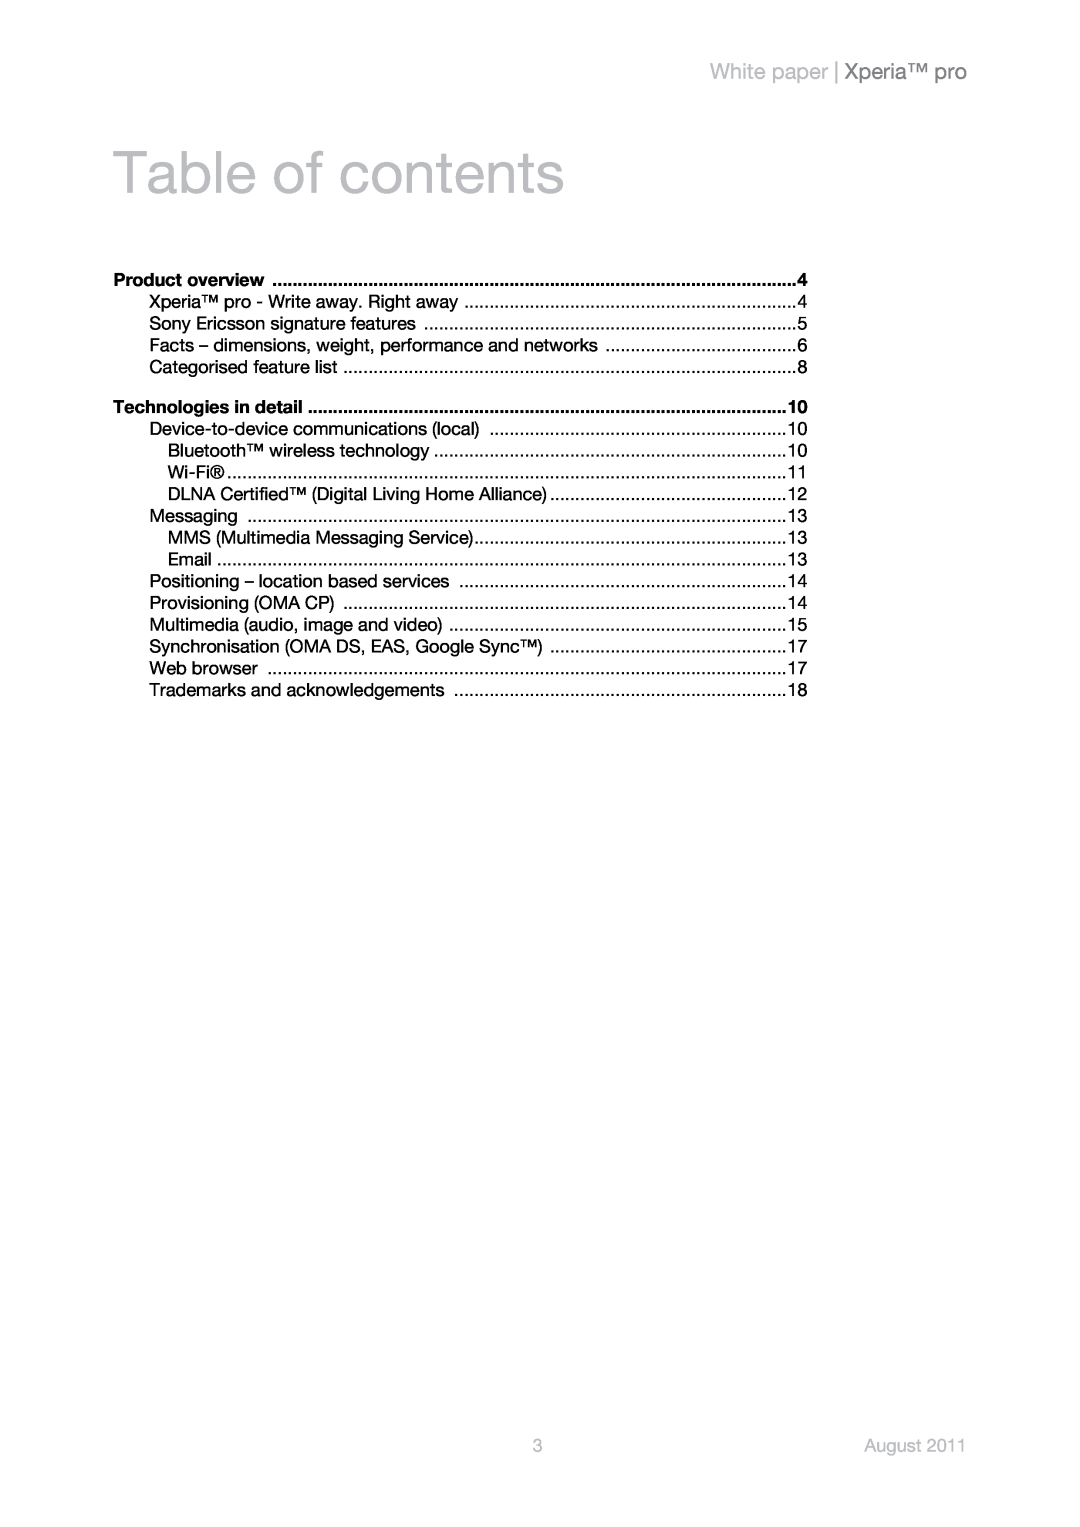 Sony Ericsson MK16i, MK16a manual Table of contents, White paper Xperia pro, August 